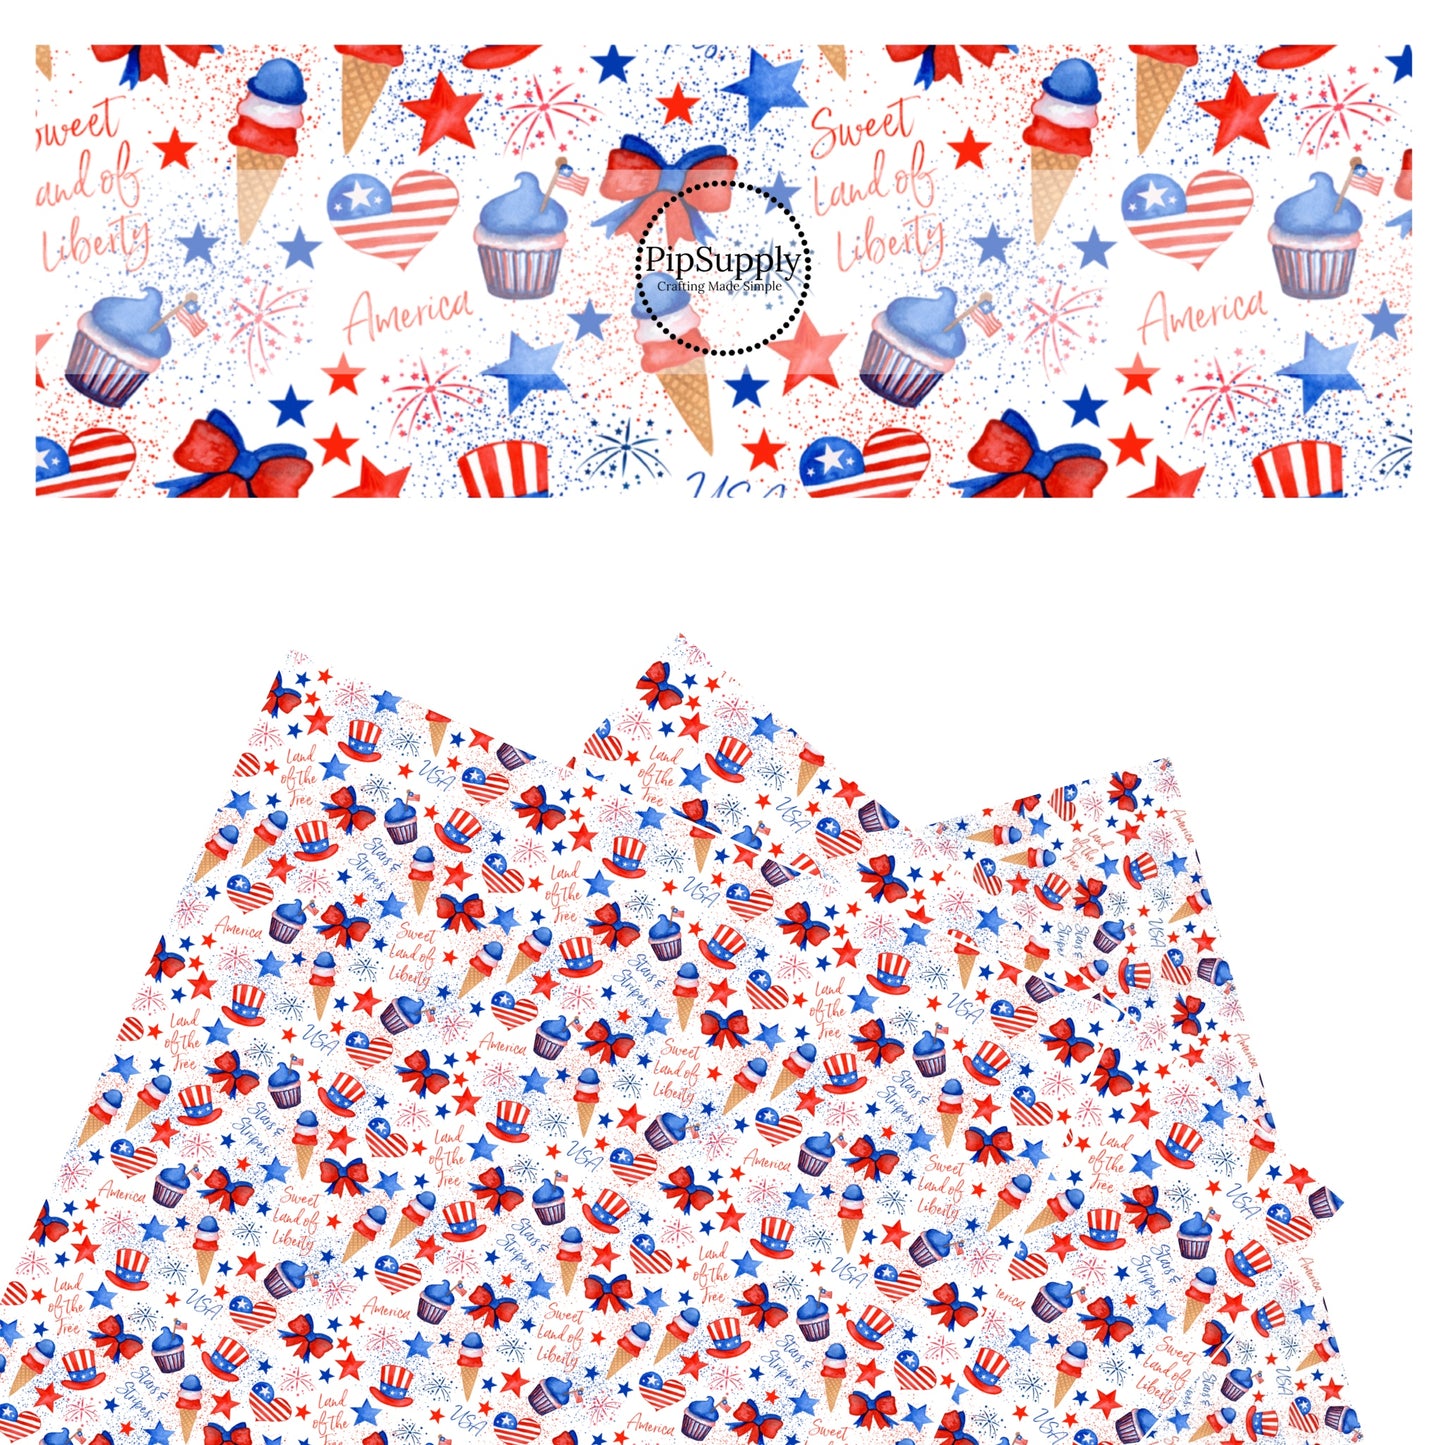 Ice cream, cupcakes, hearts, stars, and patriotic sayings on white faux leather sheets